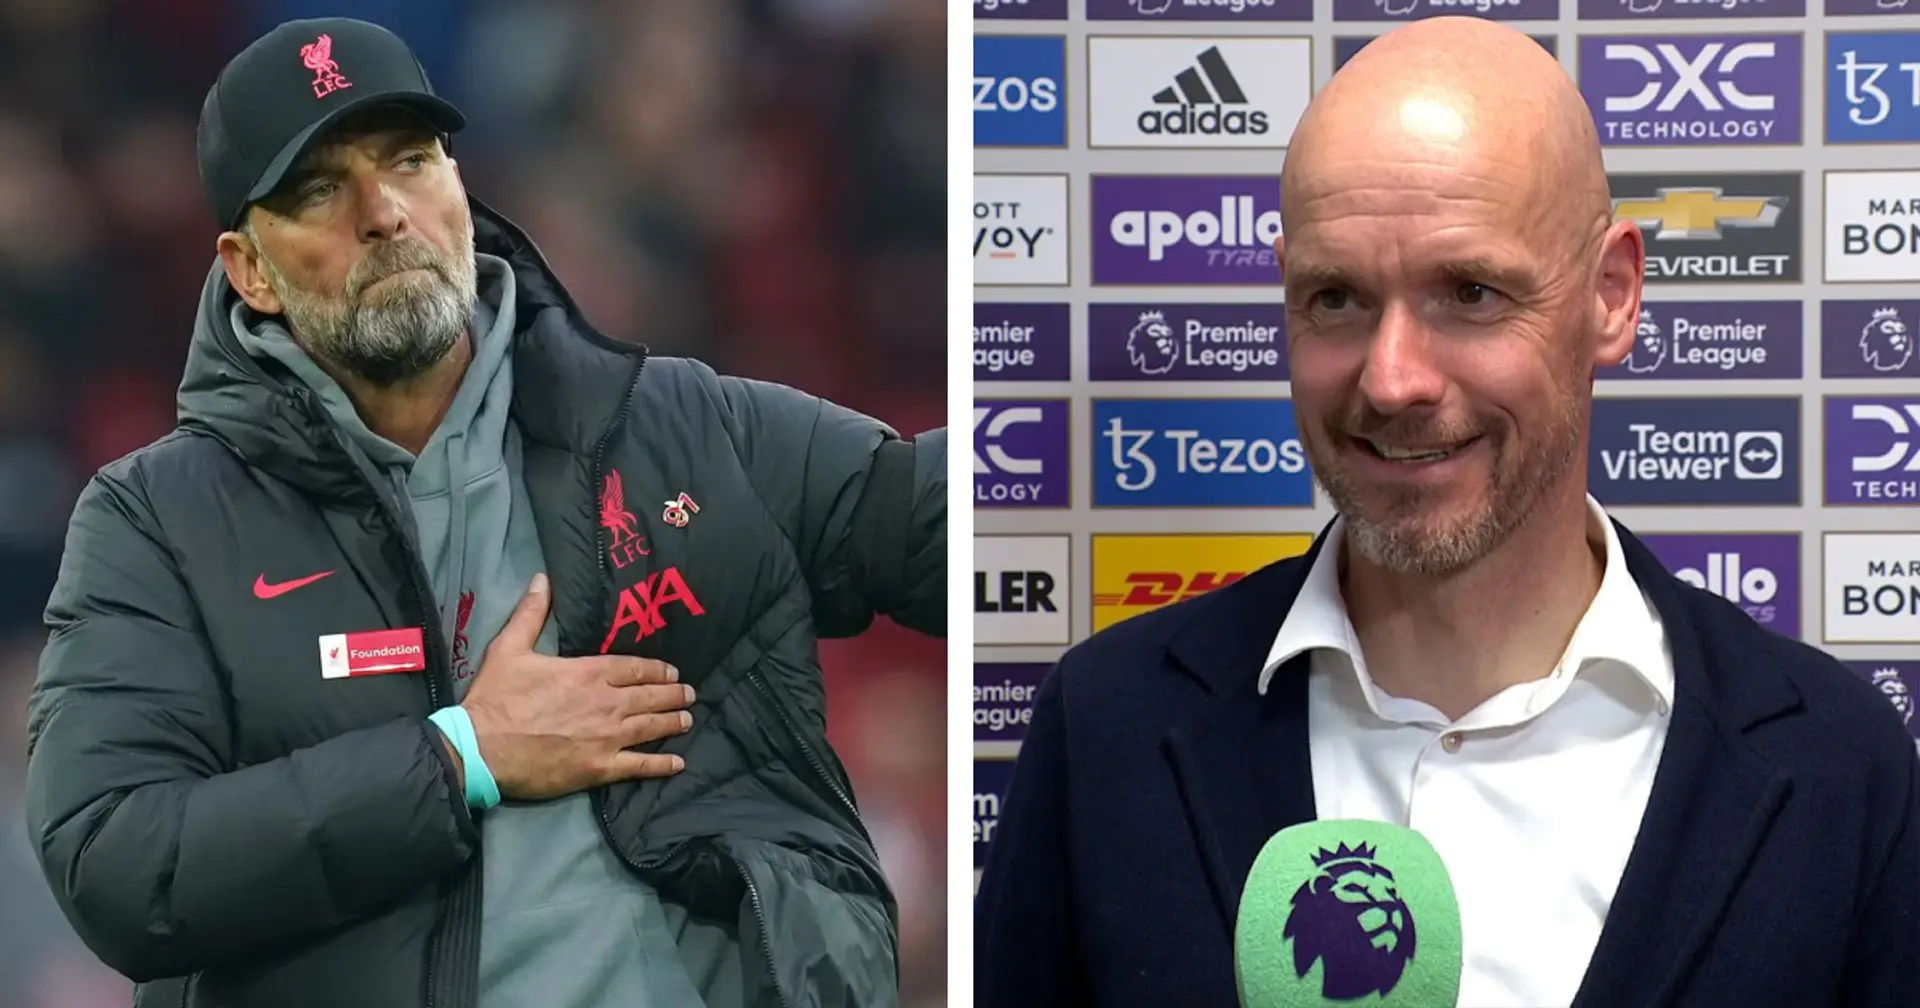 'We're convinced with what we're doing': Ten Hag plays down Liverpool concerns in top-4 race